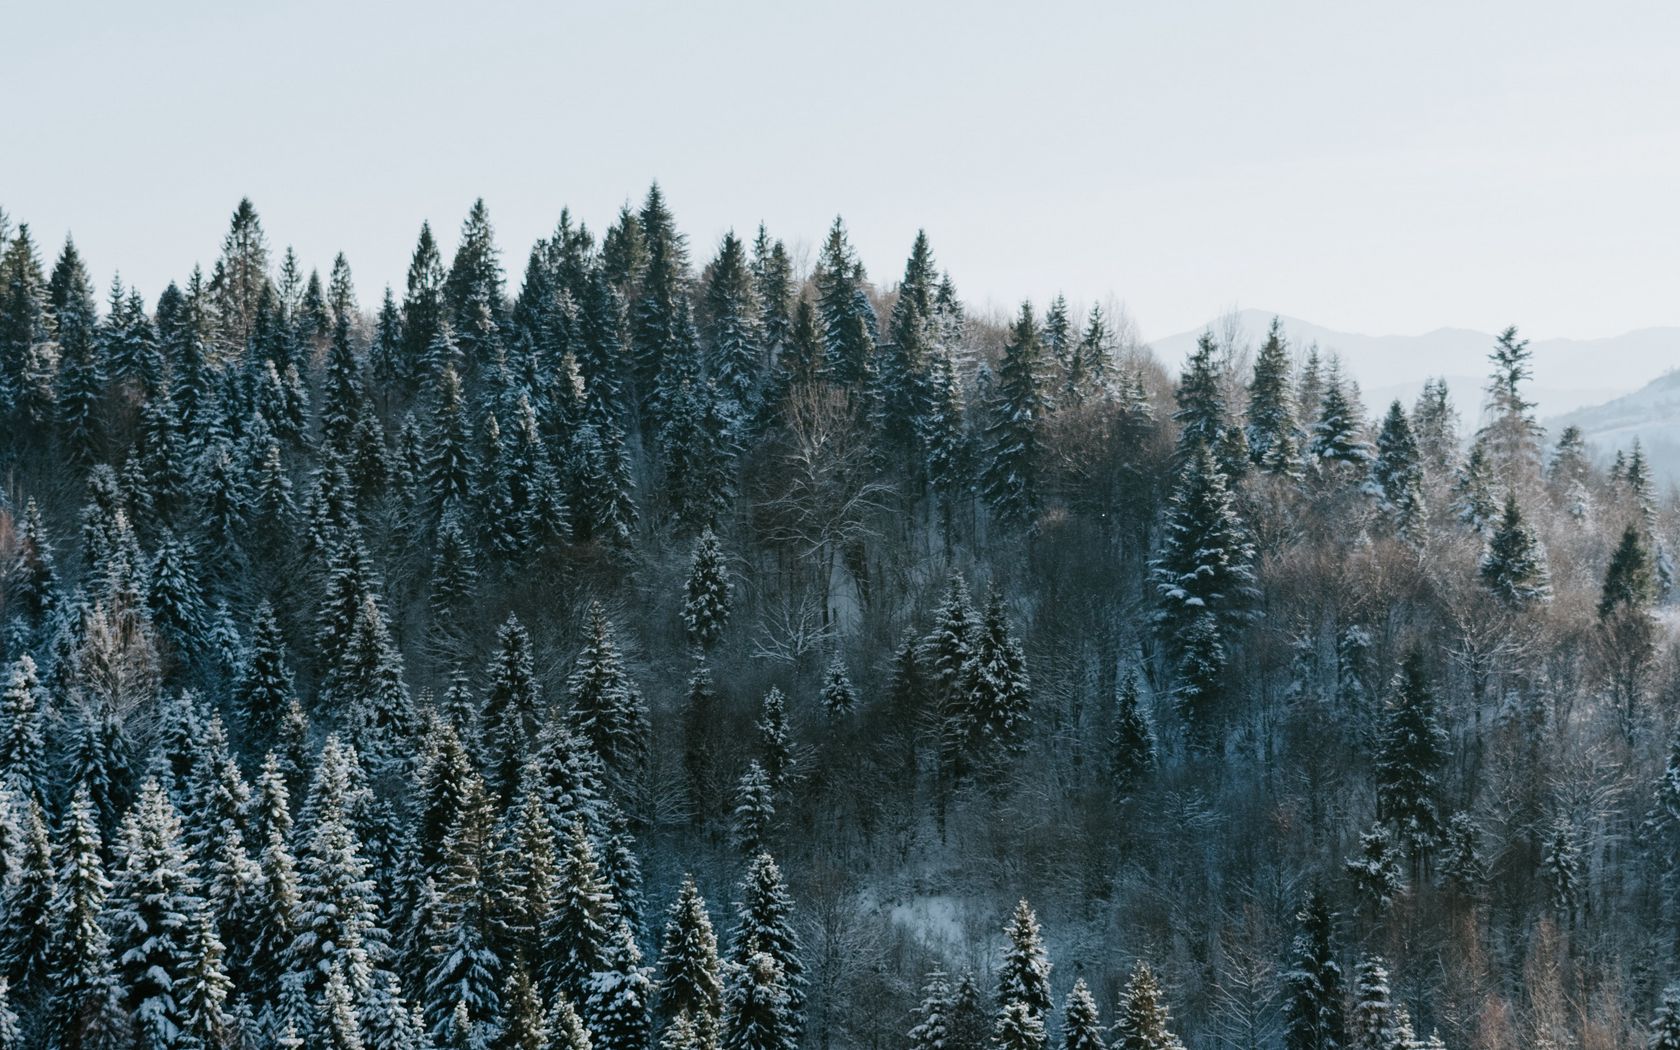 Download wallpaper 1680x1050 trees, winter, forest, aerial view, snowy widescreen 16:10 HD background